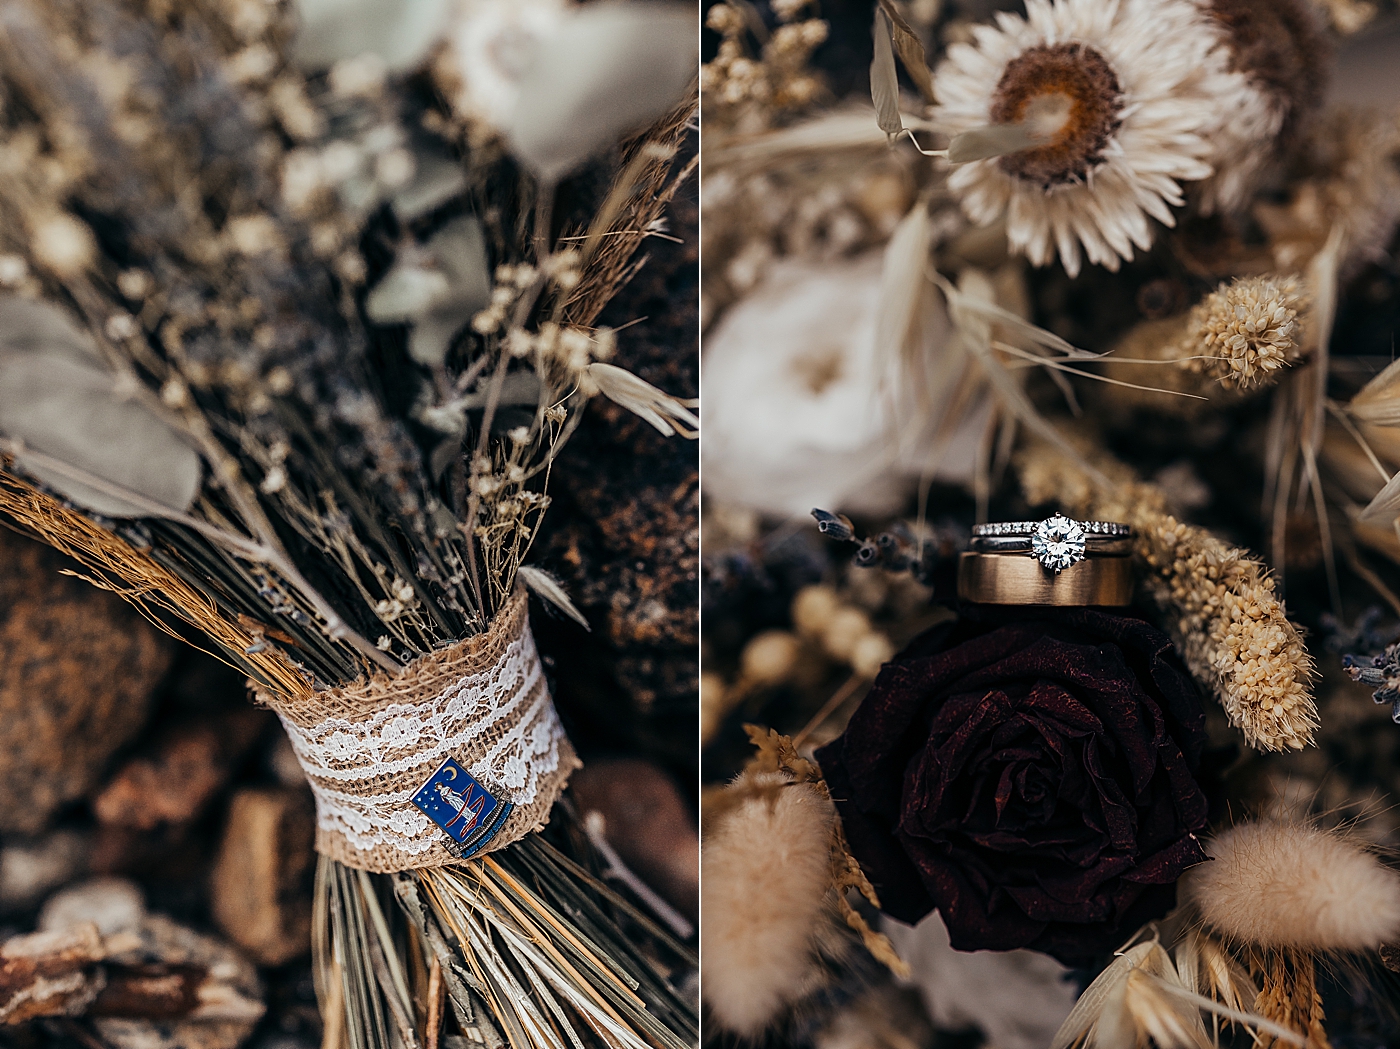 Wedding bouquet with dried flowers and ring details | Photo by Megan Montalvo Photography.